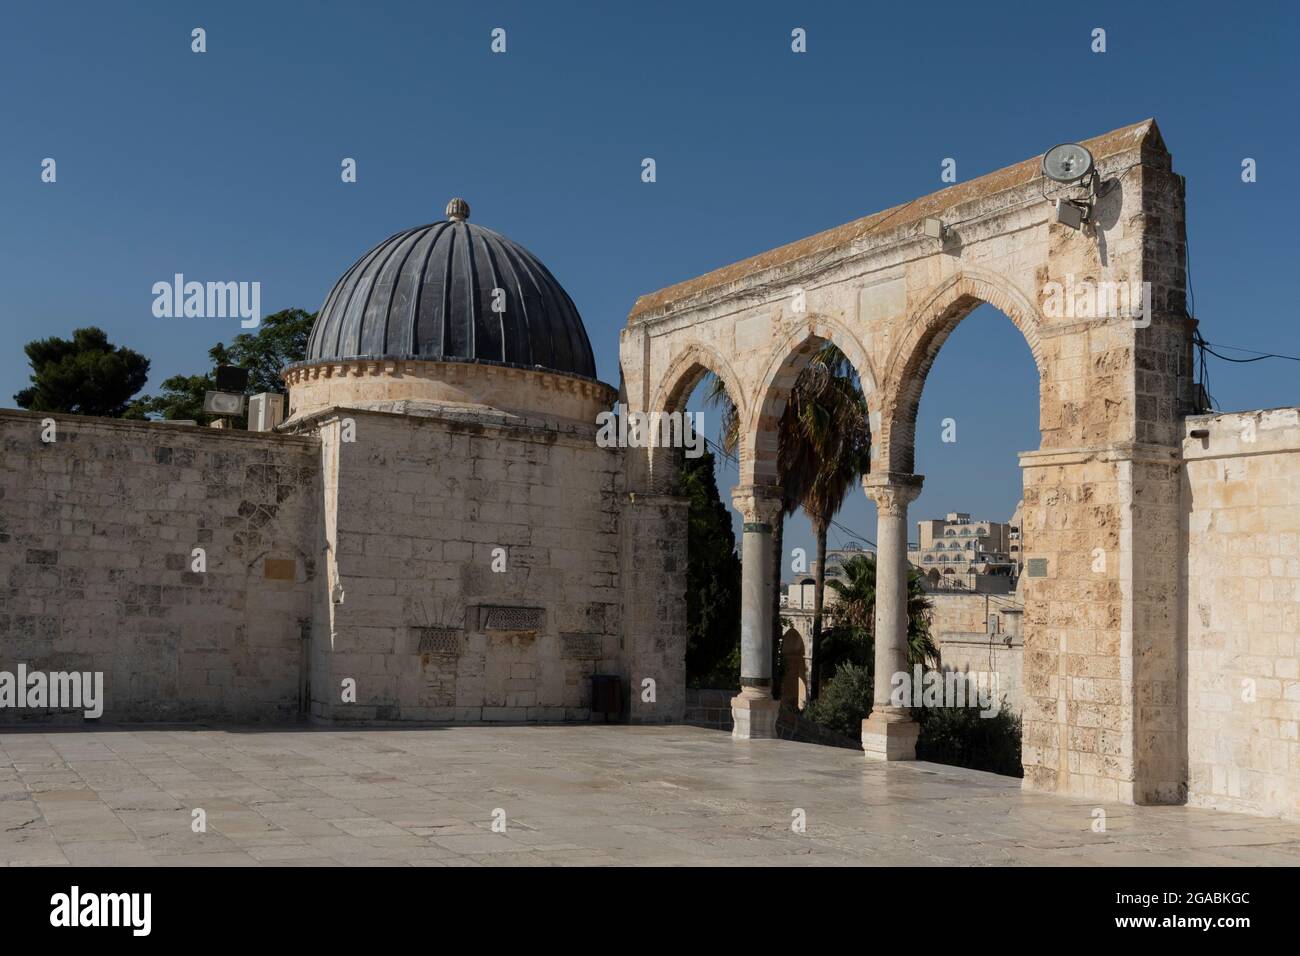 The Dome of al-Nahawiya (Qubat ul-Nahawiya), Established by King Sharaf al-Din Abu al-Mansur Issa al-Ayyubi in 1207 CE located at the southwestern platform of the Temple Mount known as The Noble Sanctuary and to Muslims as the Haram esh-Sharif in the Old City East Jerusalem Israel Stock Photo